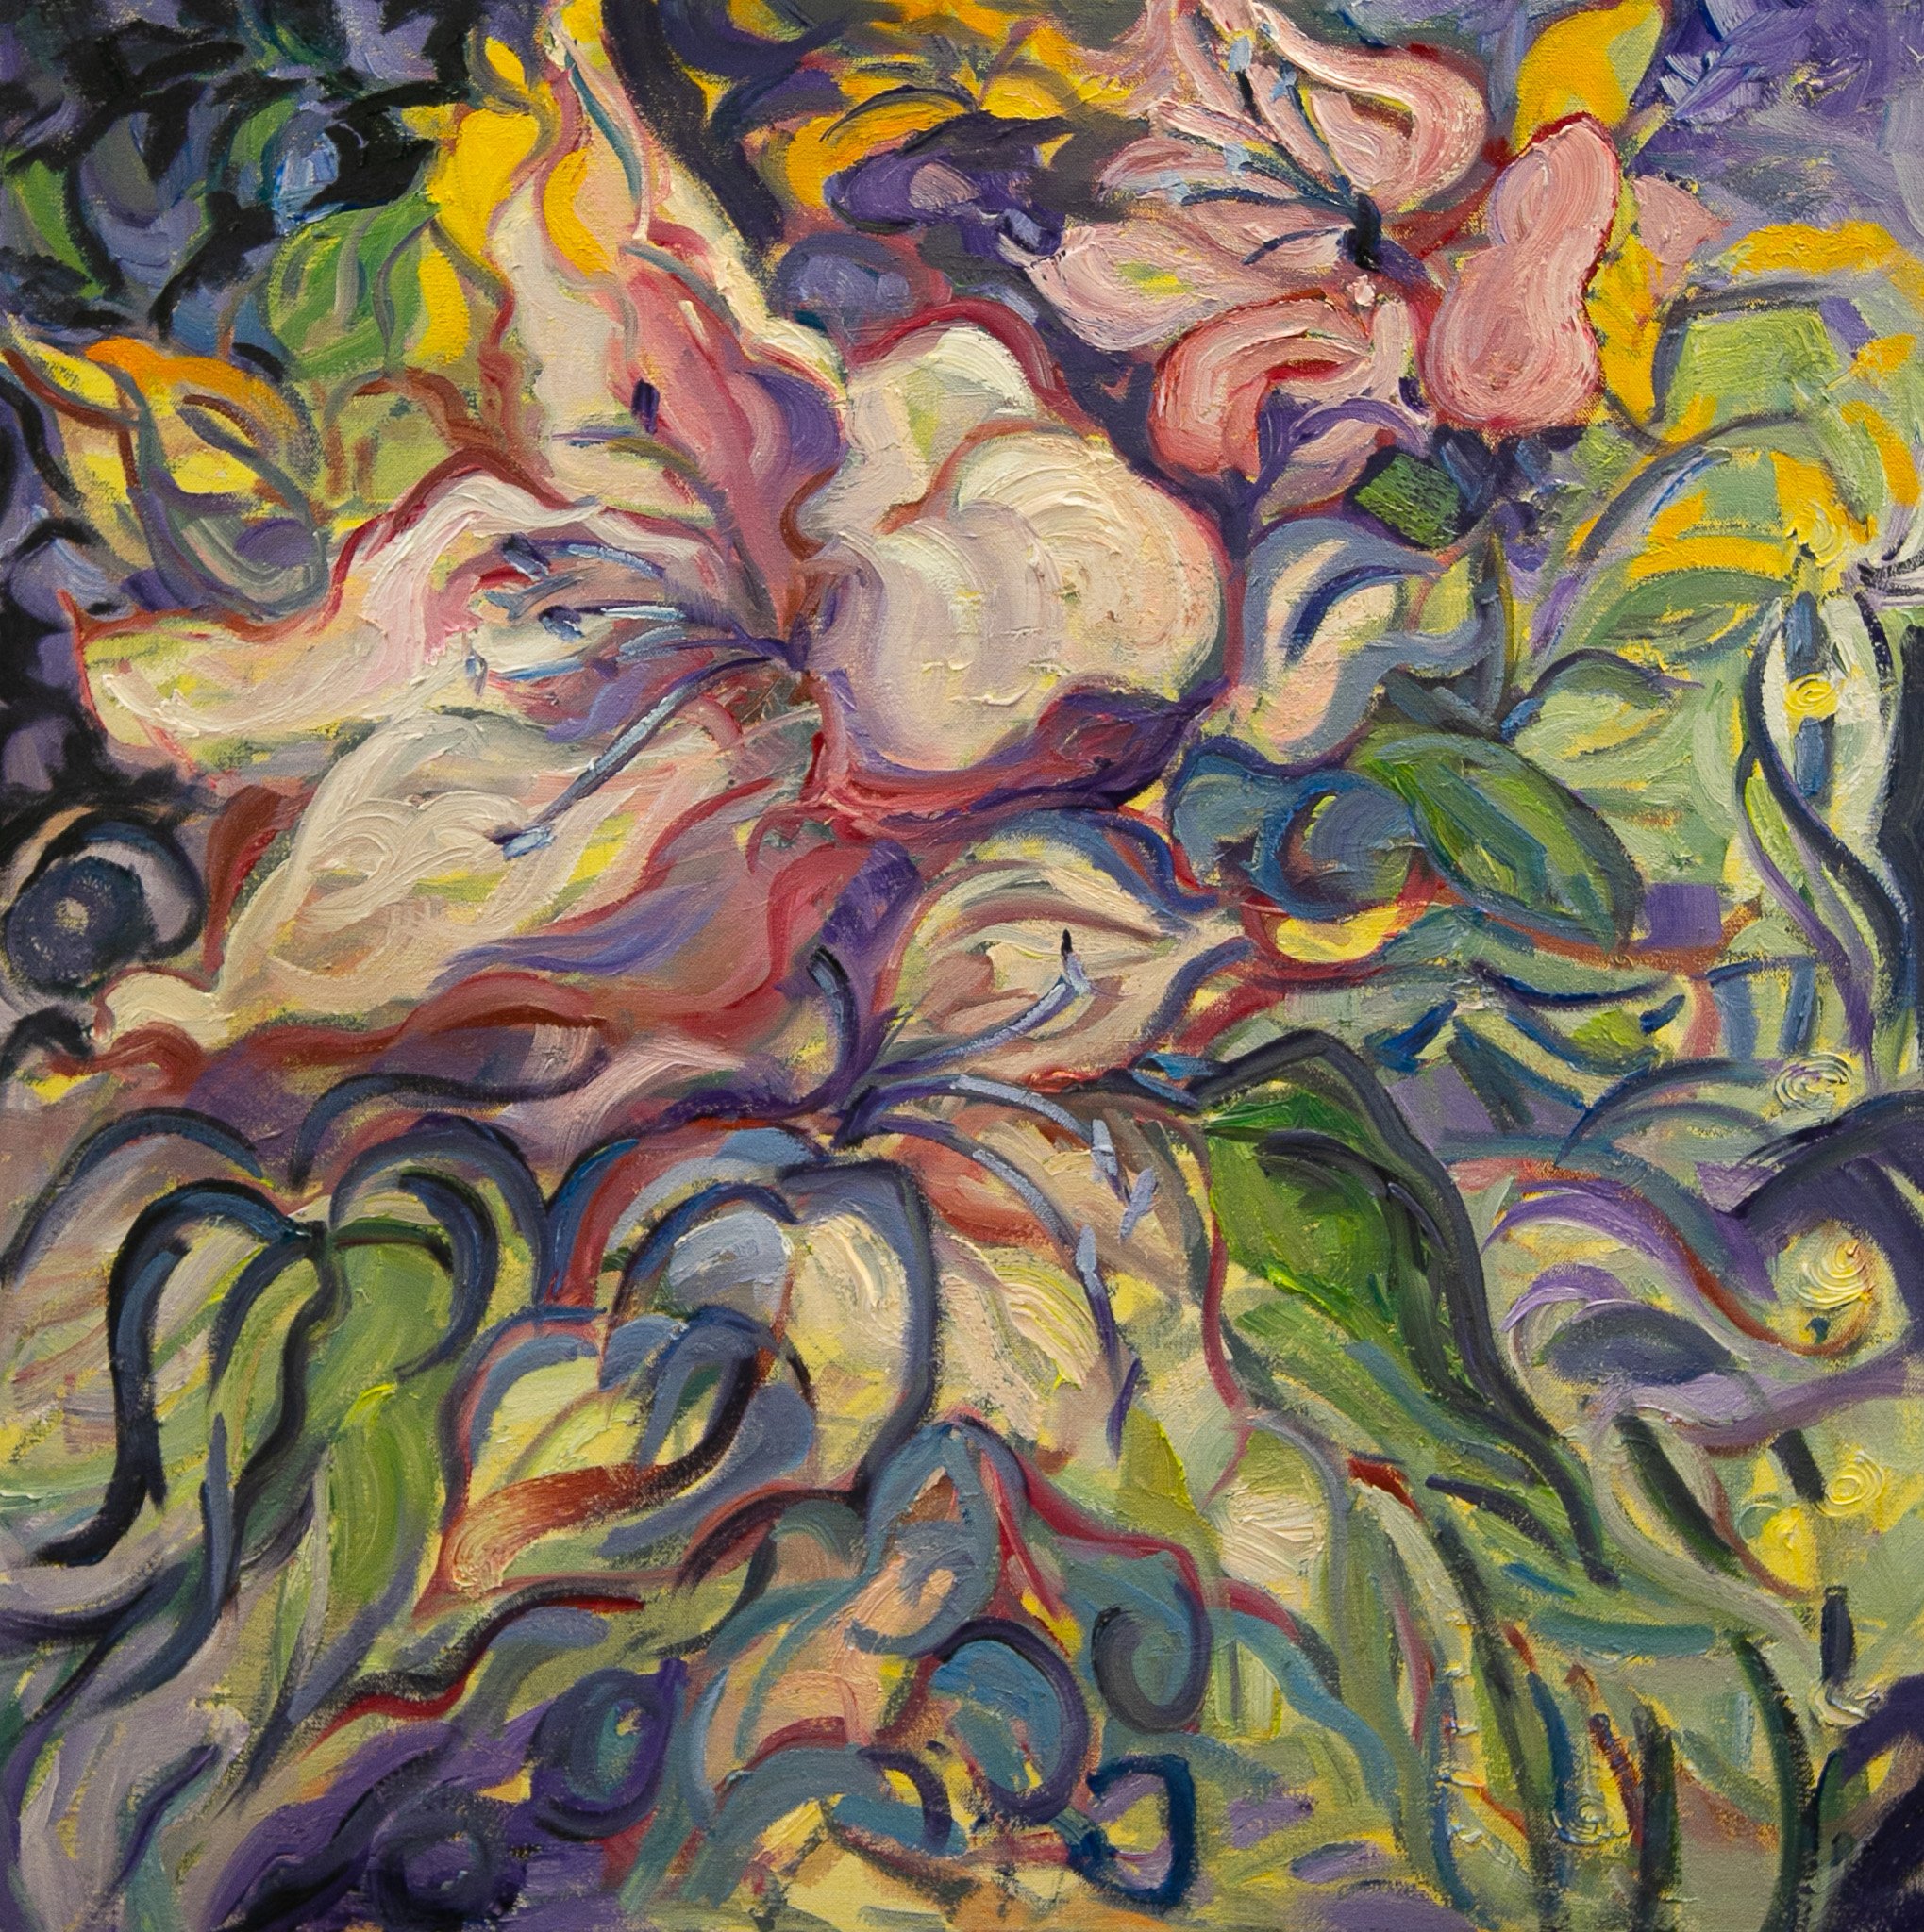   Lily on the Move   30" x 30"   Oil on canvas 